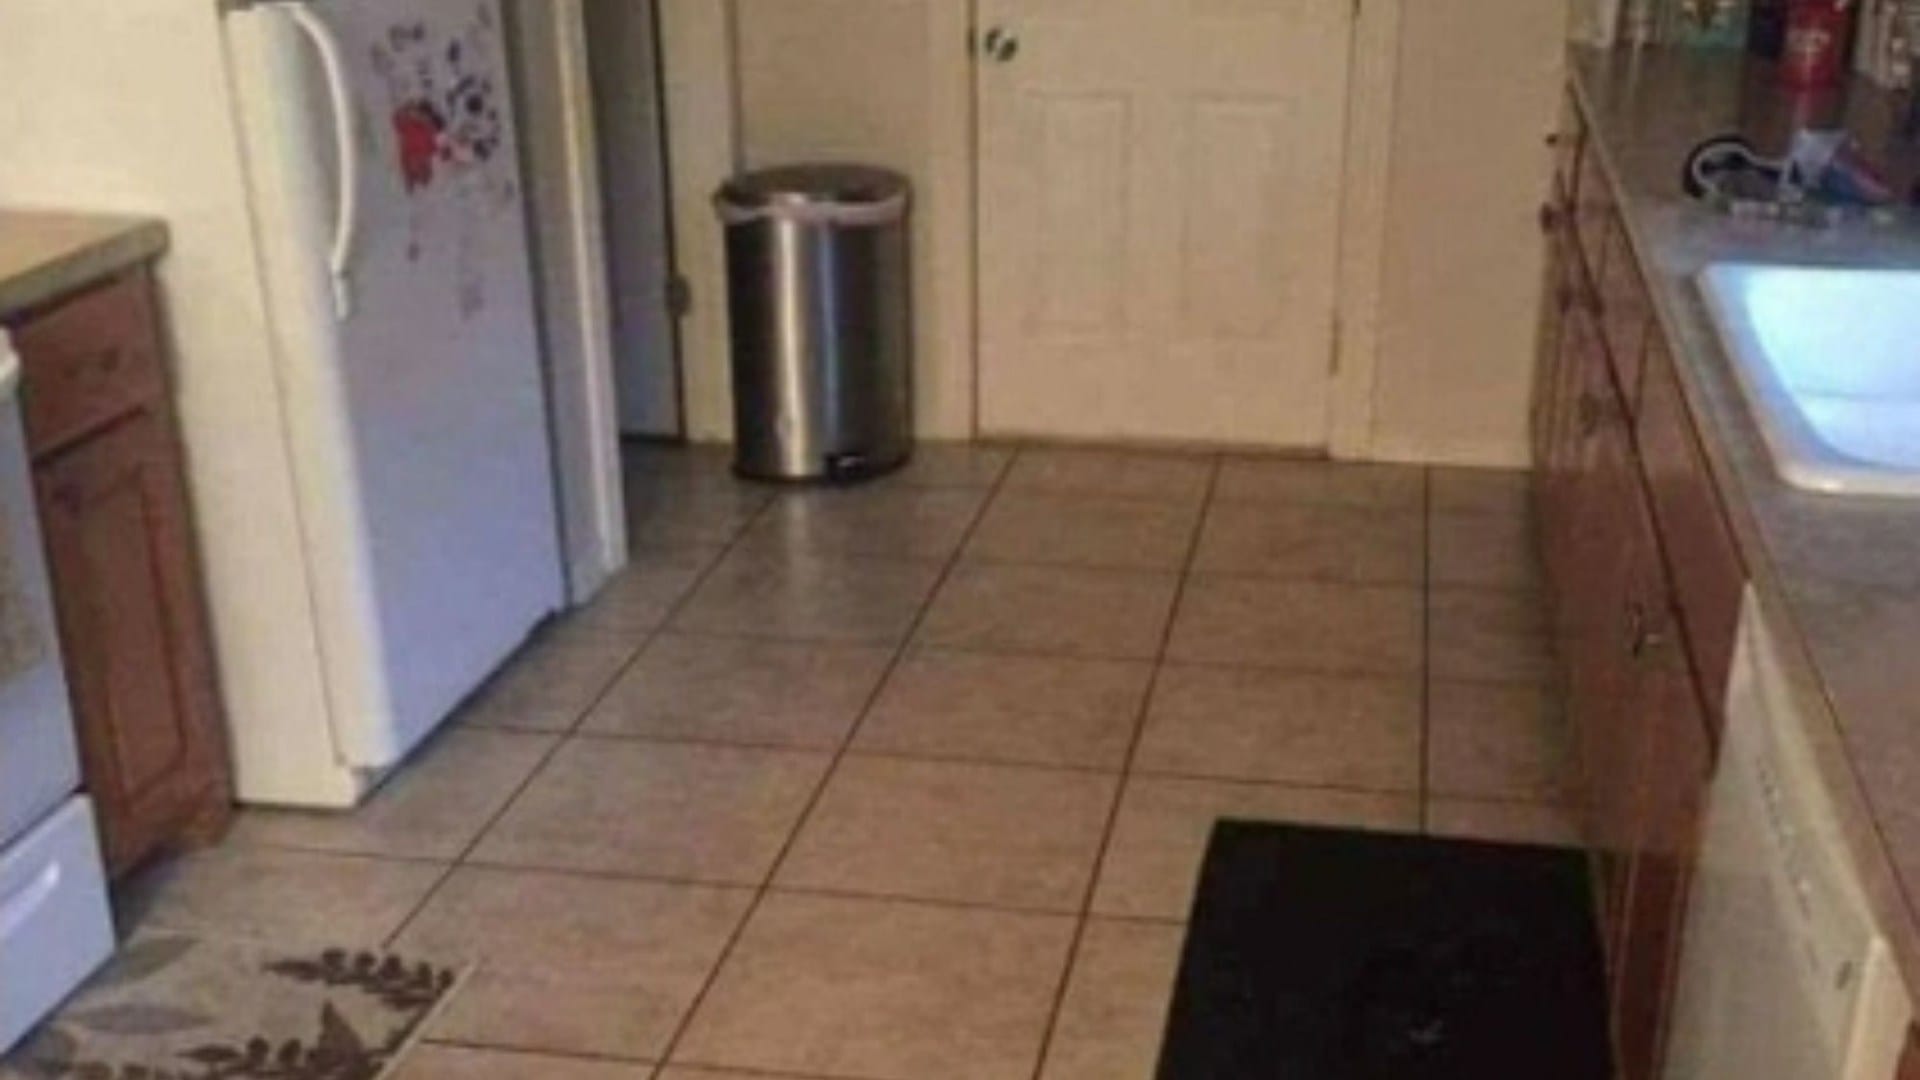 You have 20/20 vision if you can spot the dog hidden in the kitchen in less than 10 seconds